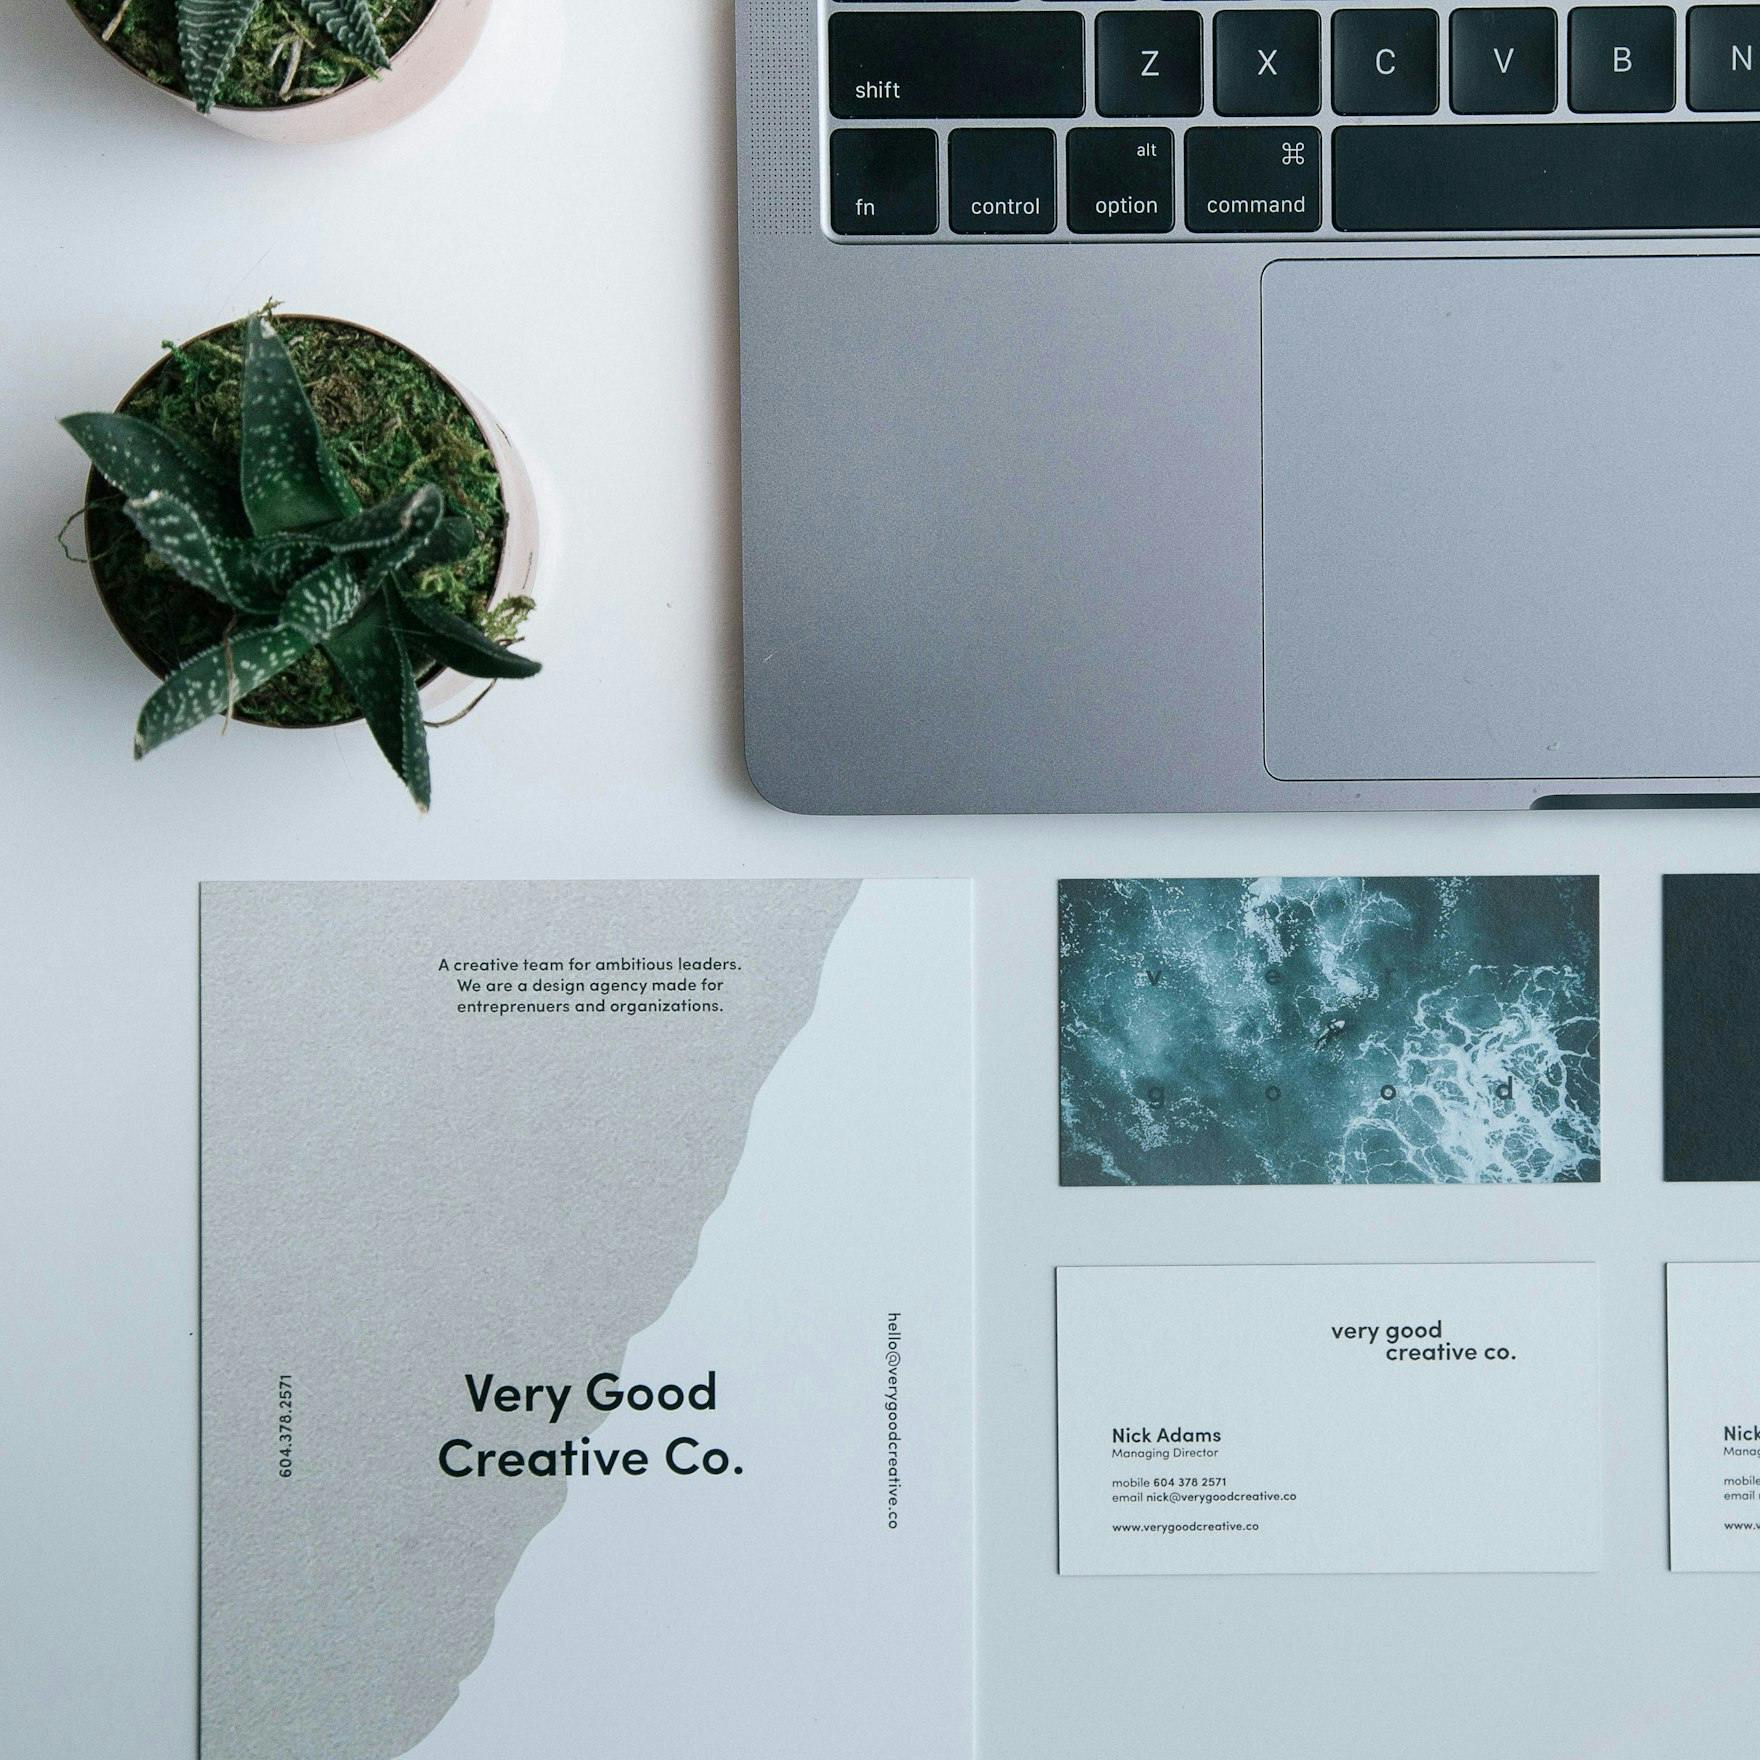 Marketing Image, Business Cards and Business Flyers on white table, decorative plants and a laptop